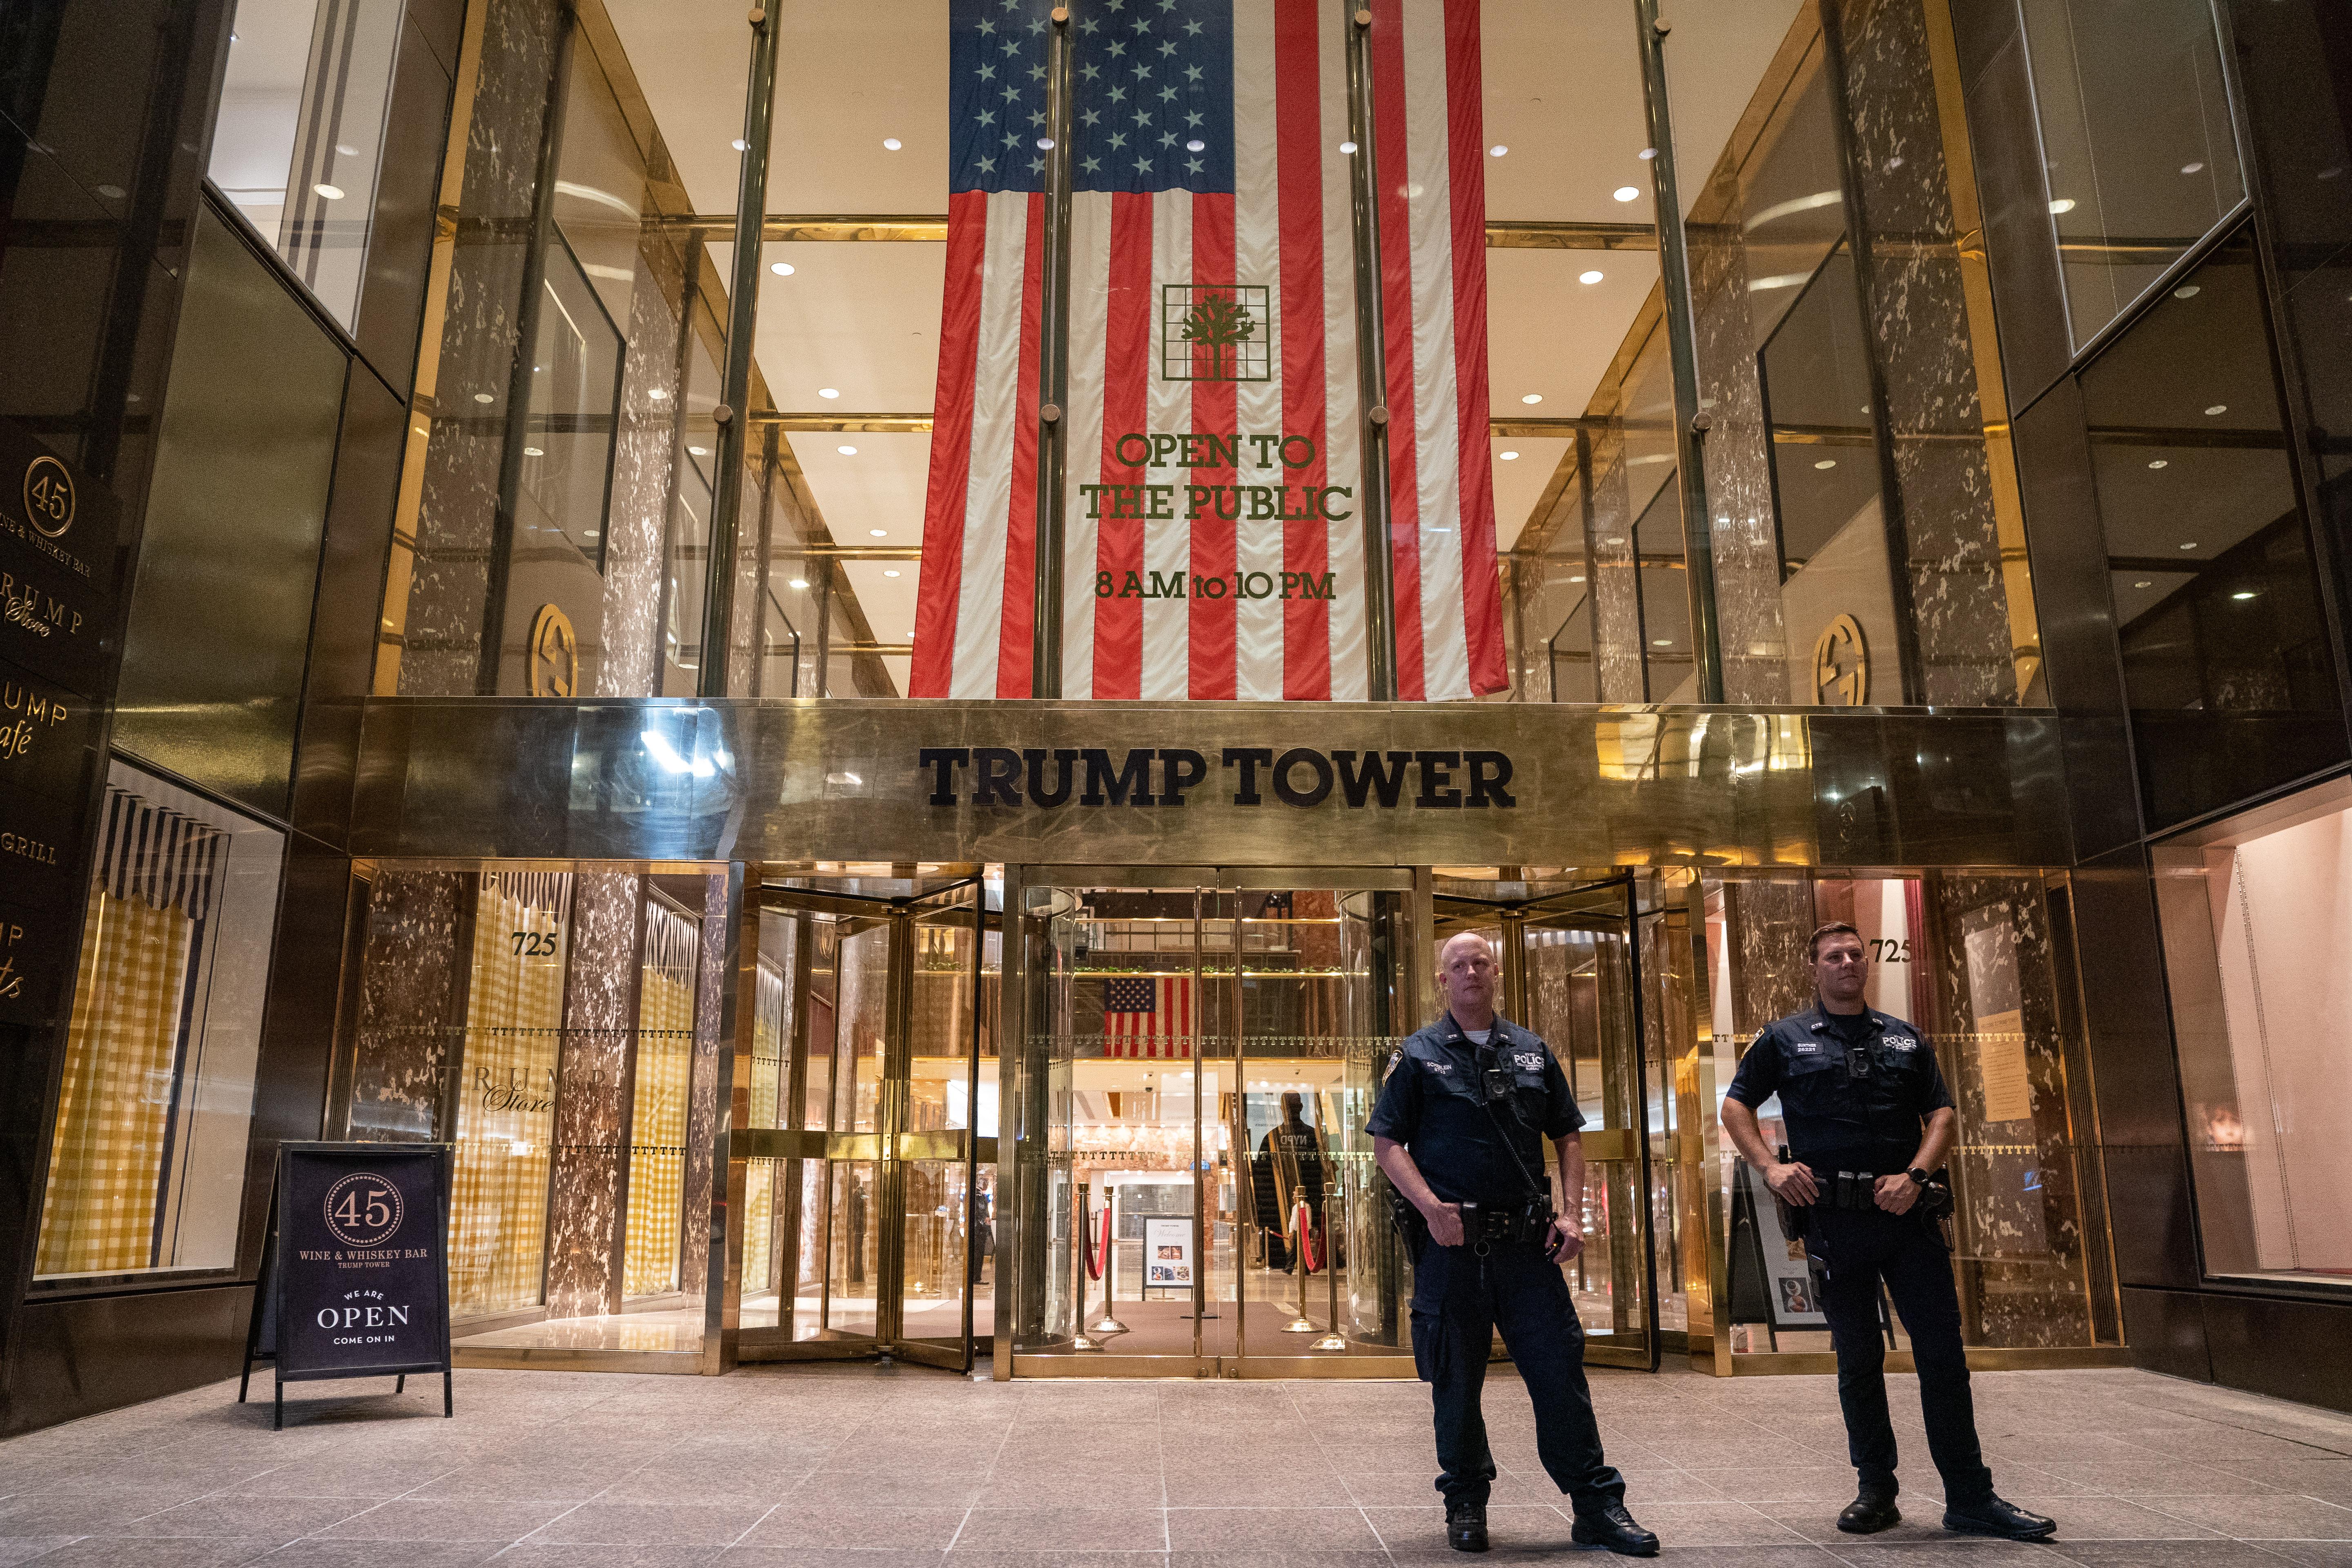 NEW YORK, NY - AUGUST 08: New York City police officers keep watch in front of Trump Tower on August 8, 2022 in New York City. The FBI raided former President Donald Trump's Mar-a-Lago, Florida home earlier today to retrieve classified White House documents. (Photo by David Dee Delgado/Getty Images)